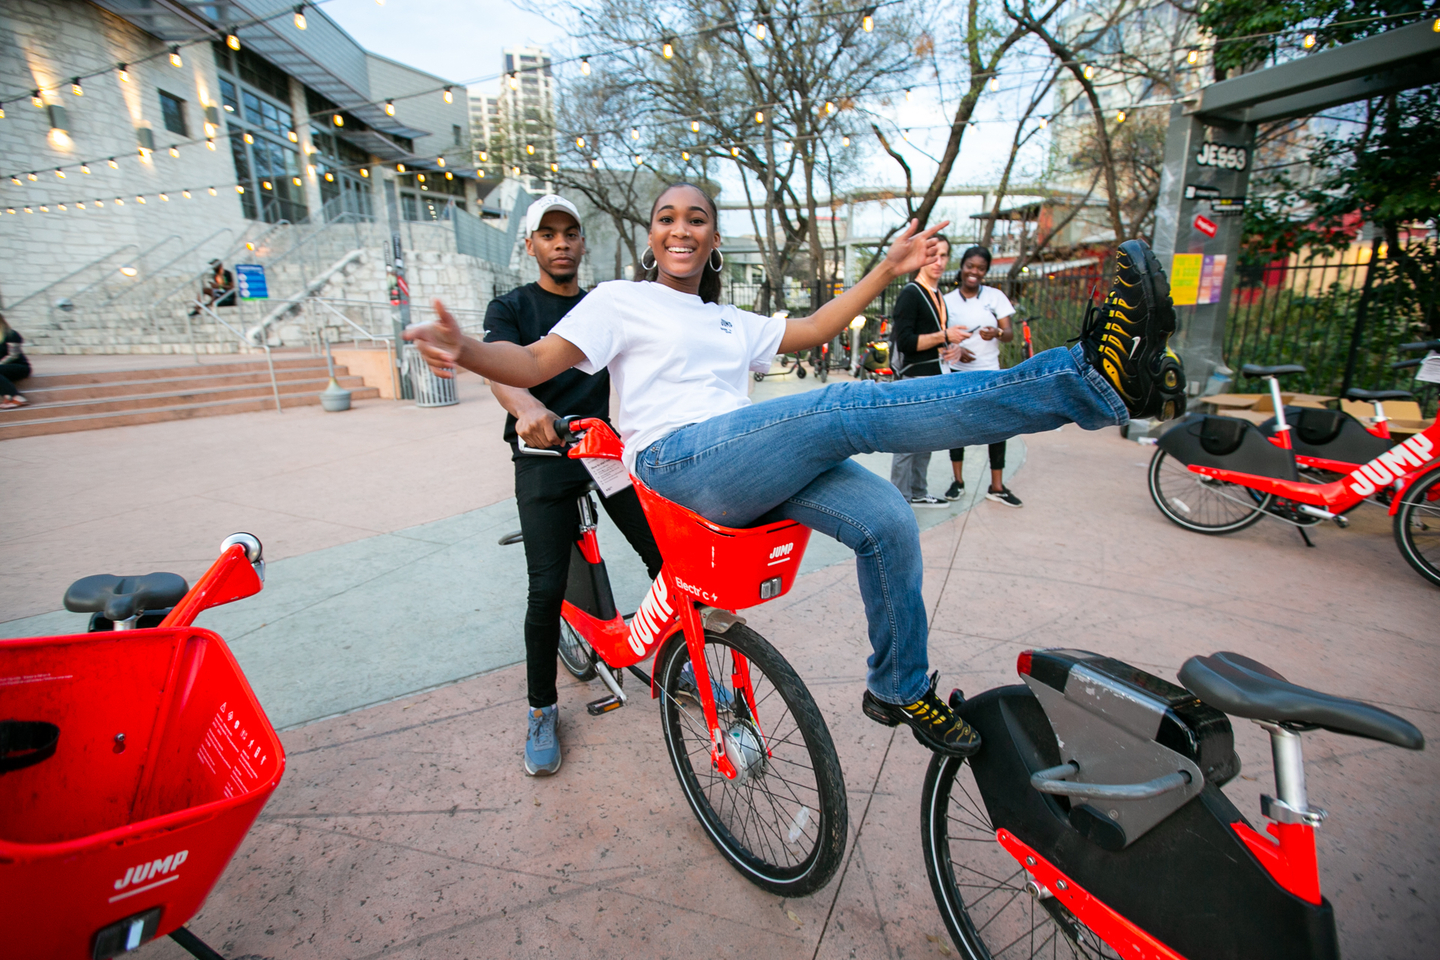 JUMP is one of the fastest ways to get around SXSW – with exclusive pickup and dropoff areas for JUMP electric bikes and scooters around the Austin Convention Center, available directly through your Uber app. Photo by Waytao Shing